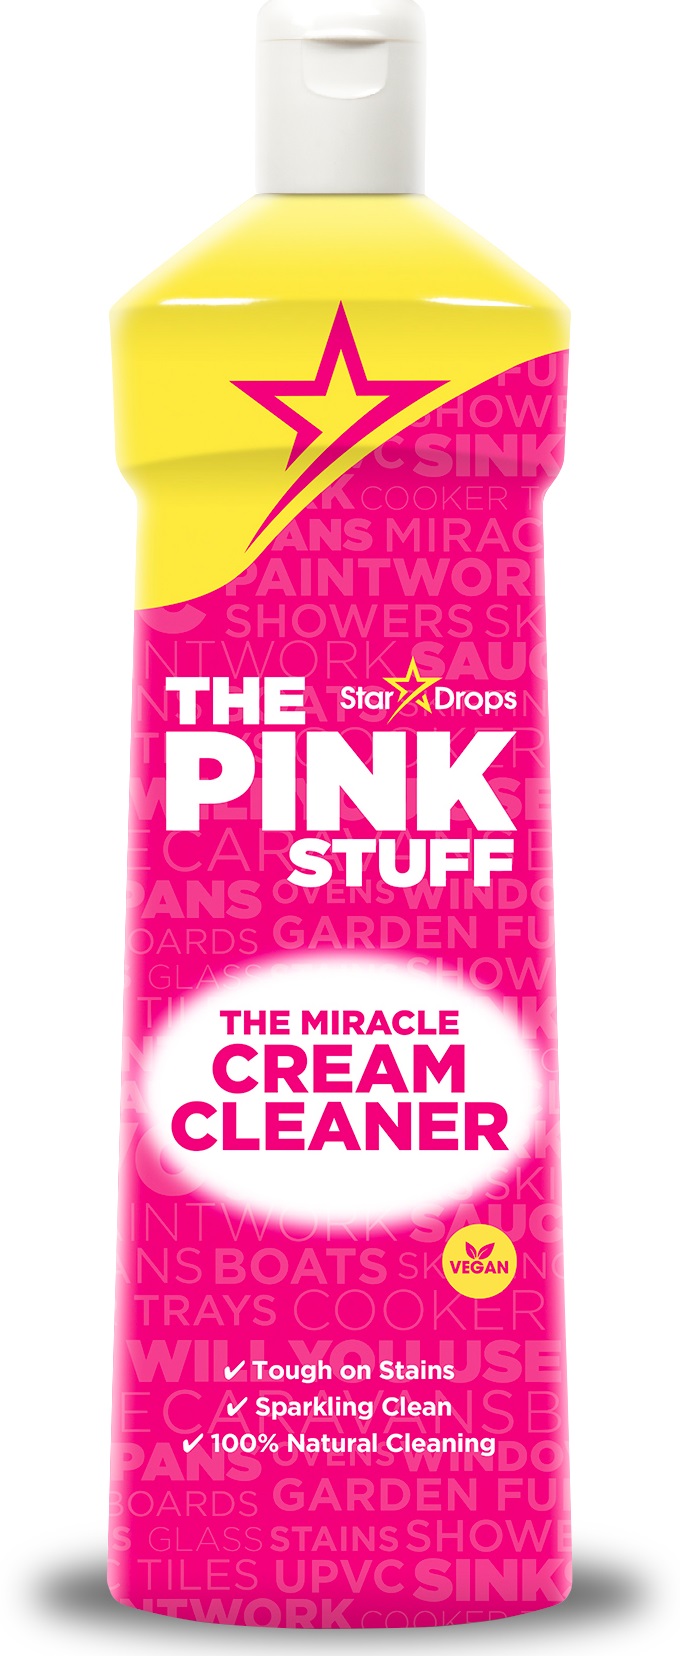 The Pink Stuff Miracle Floor Cleaner Spray - 750ml